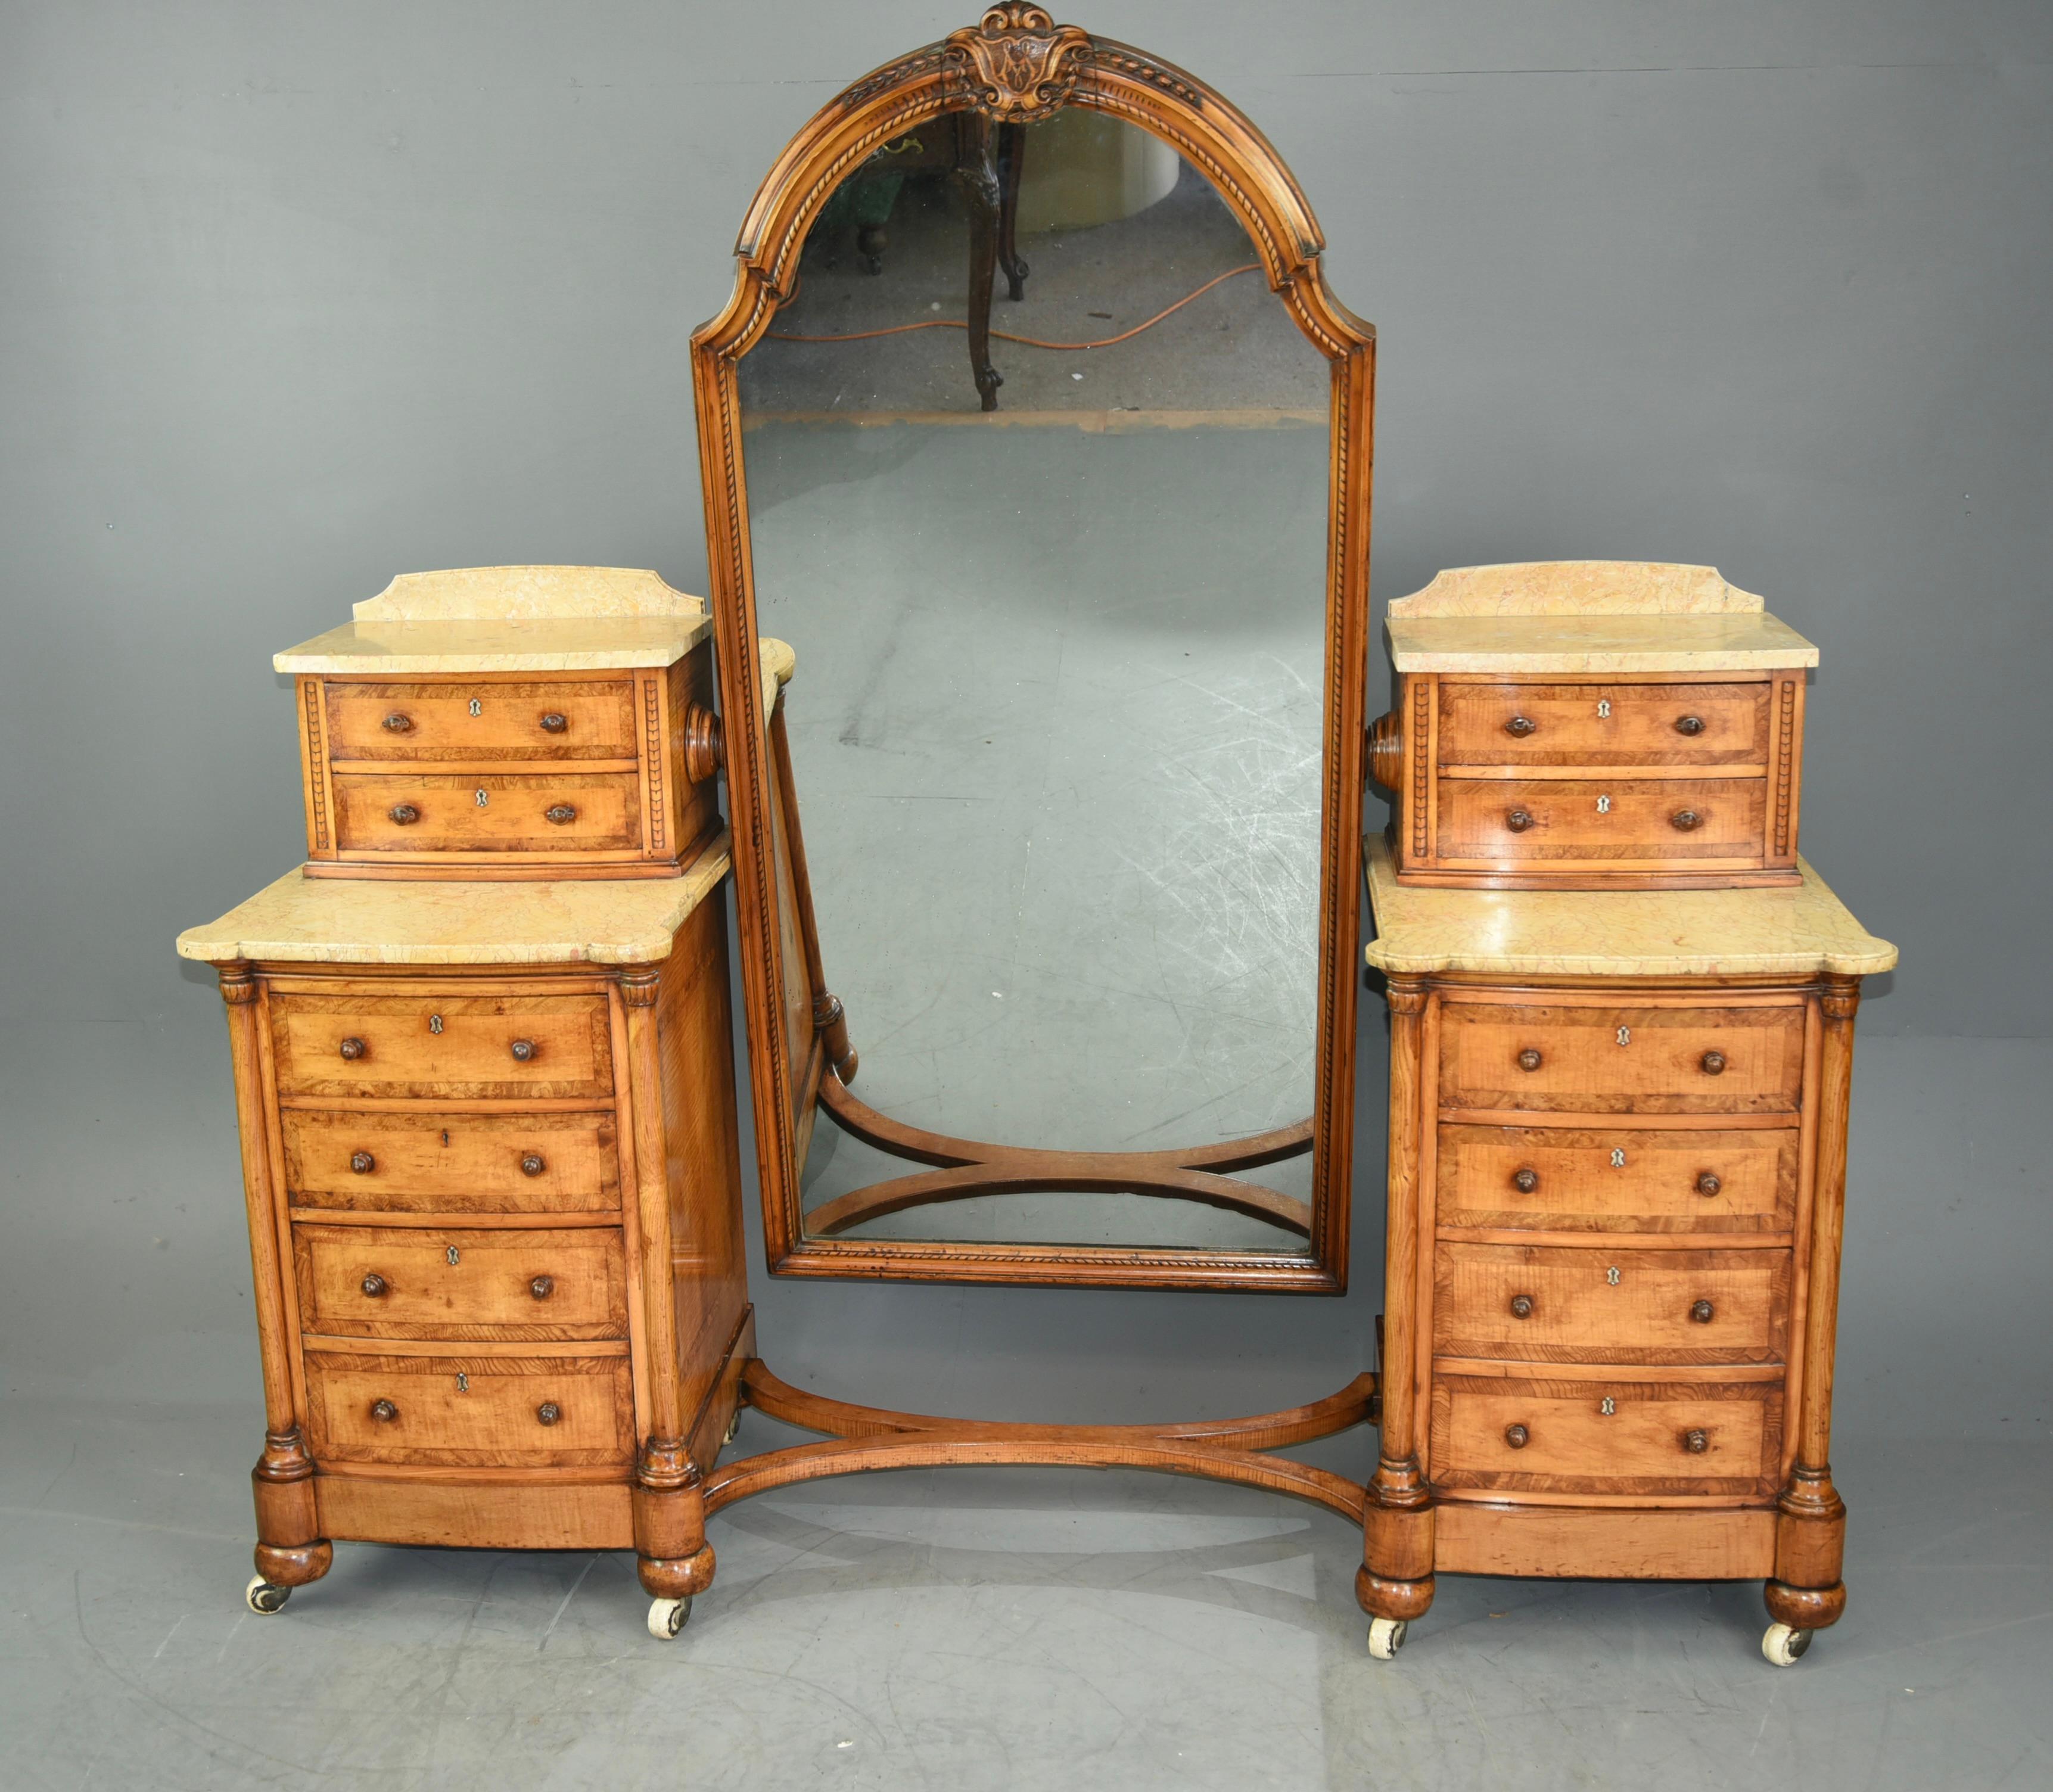 Fine quality rare Victorian satin wood pedestal dressing table and matching ottoman.
The dressing table has three drawers to each pedestal there is an additional two small drawers above.
The pedestal have original marble tops The mirror has an